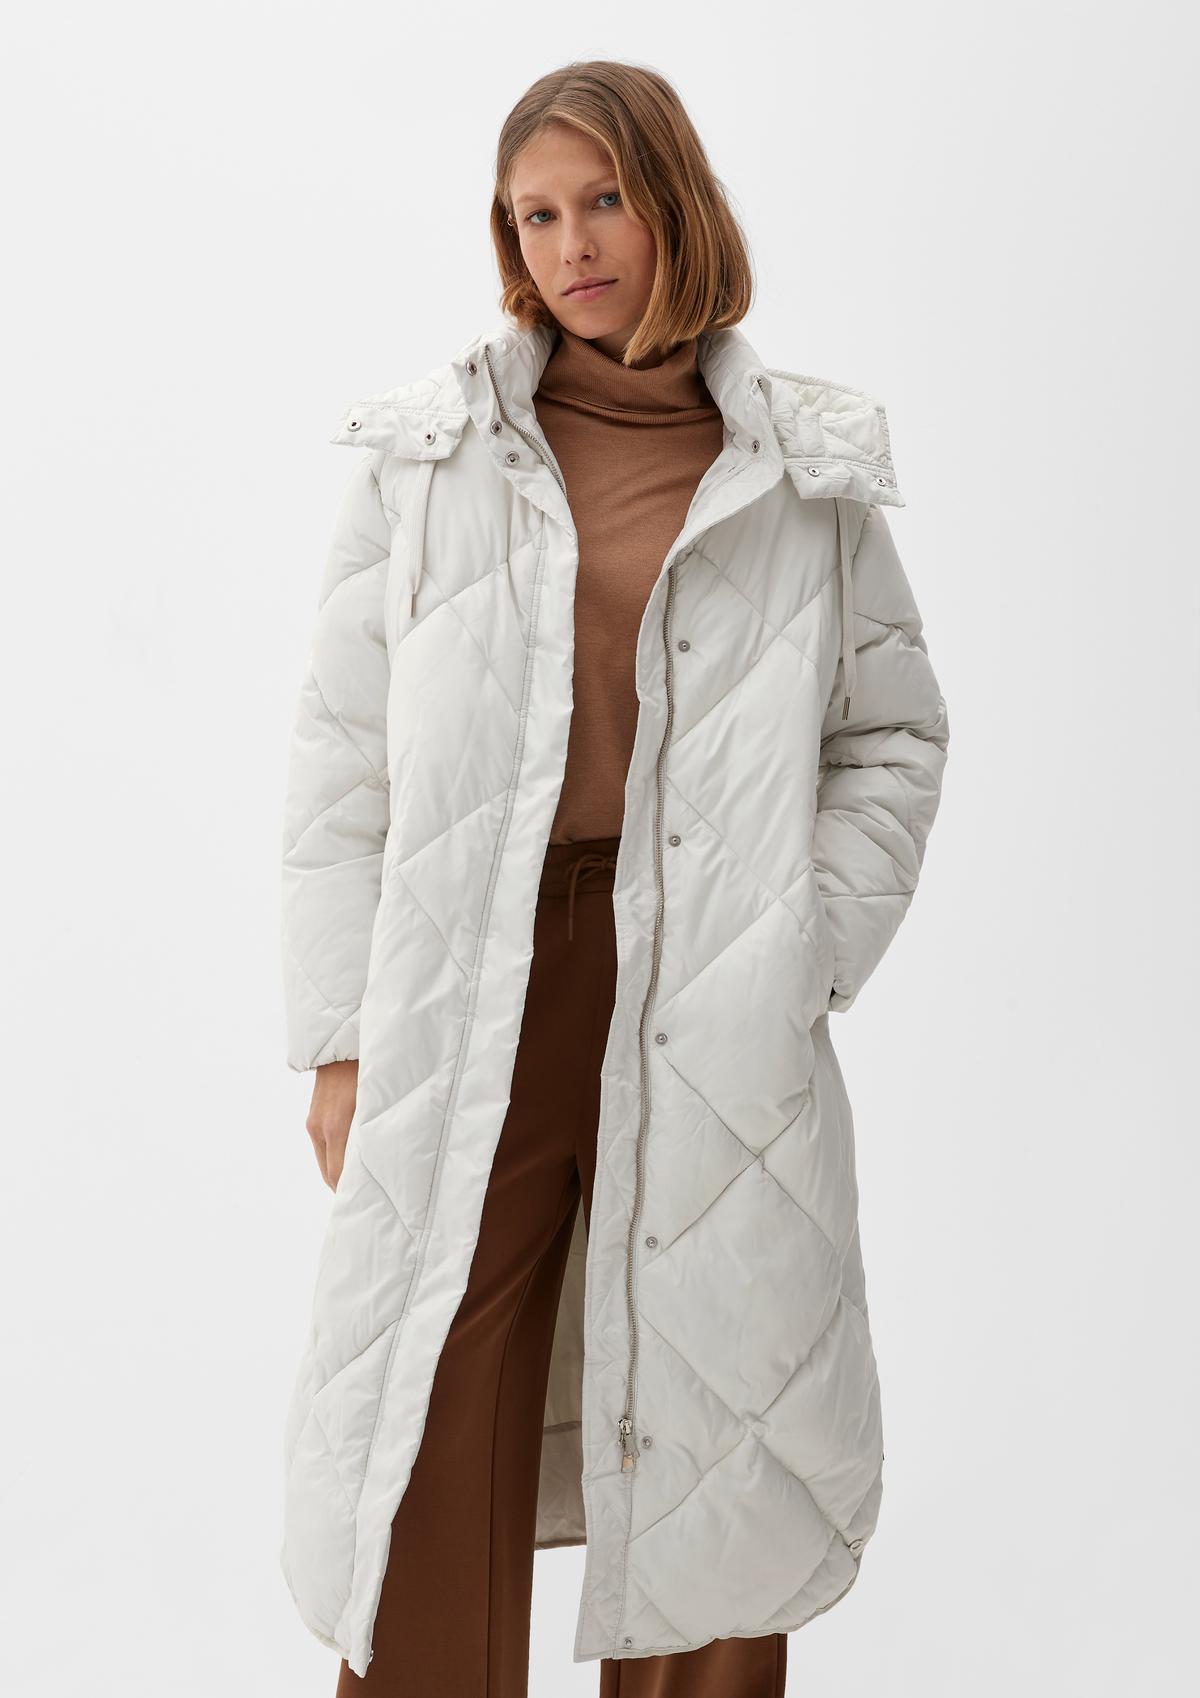 Women's winter coats: stay stylish and warm all winter | s.Oliver